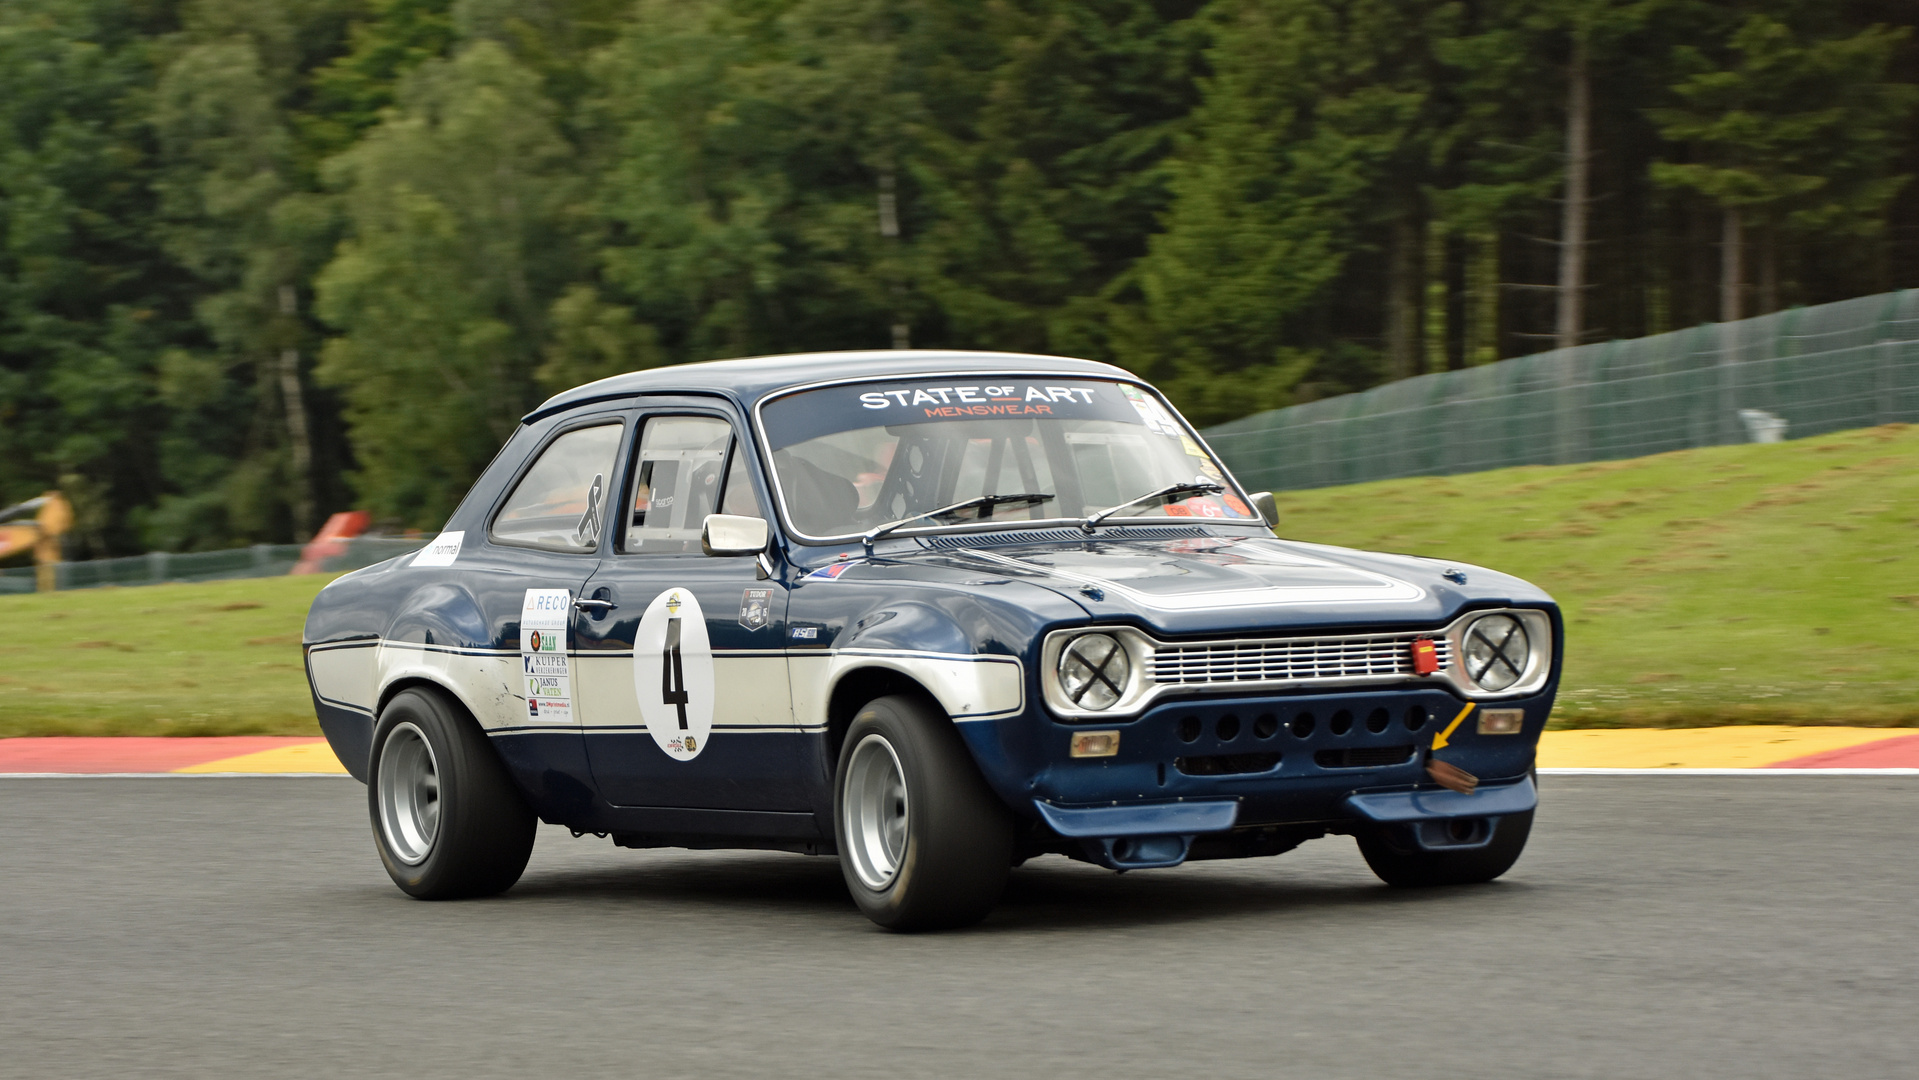 Ford Escort in Road Racing Part VII